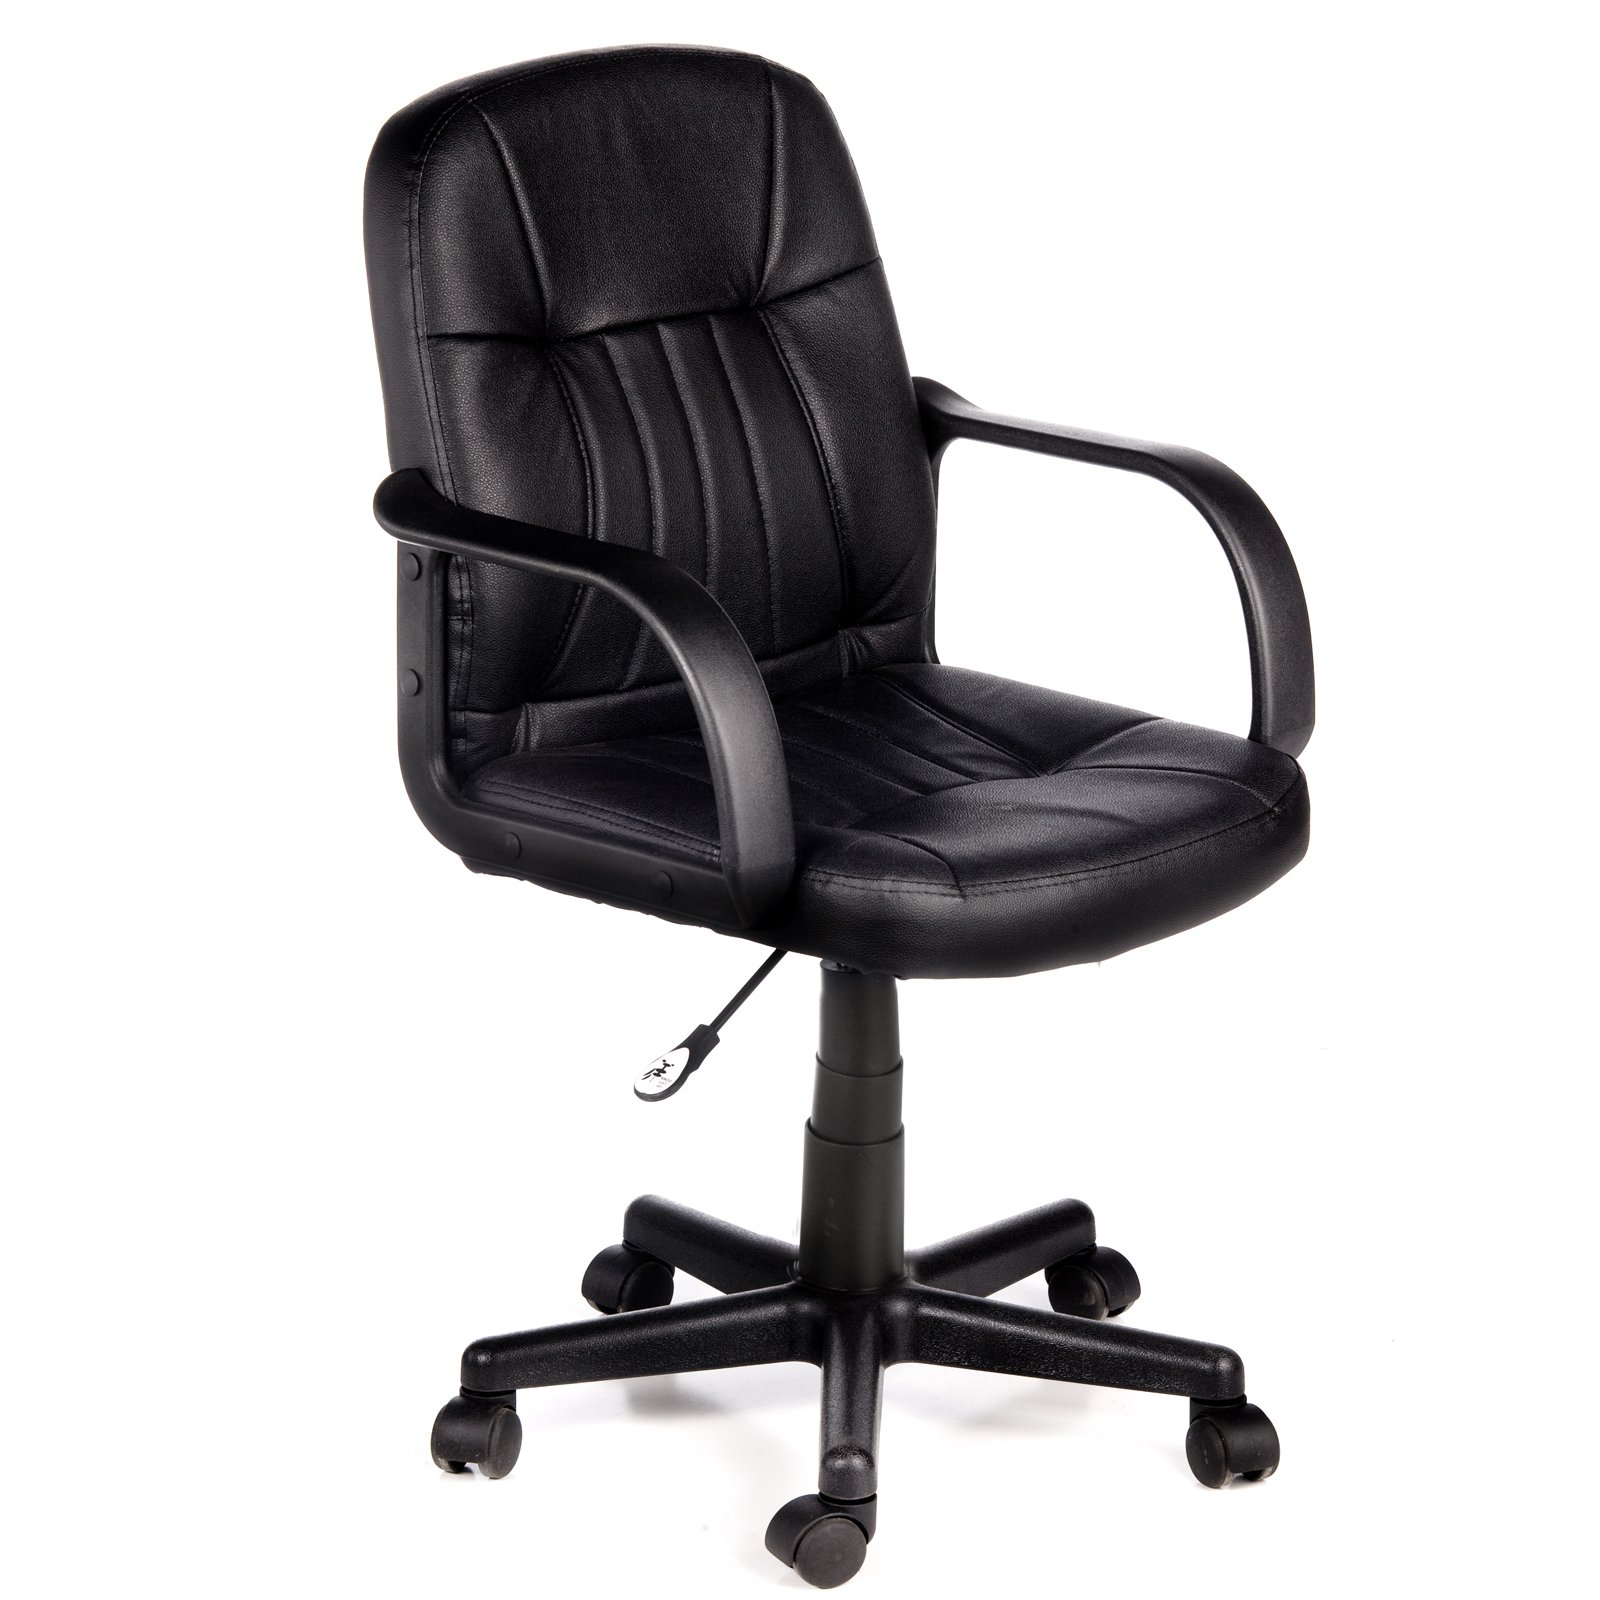 Comfort Products 60-5607M Mid-Back Leather Office Chair, Black - image 4 of 6